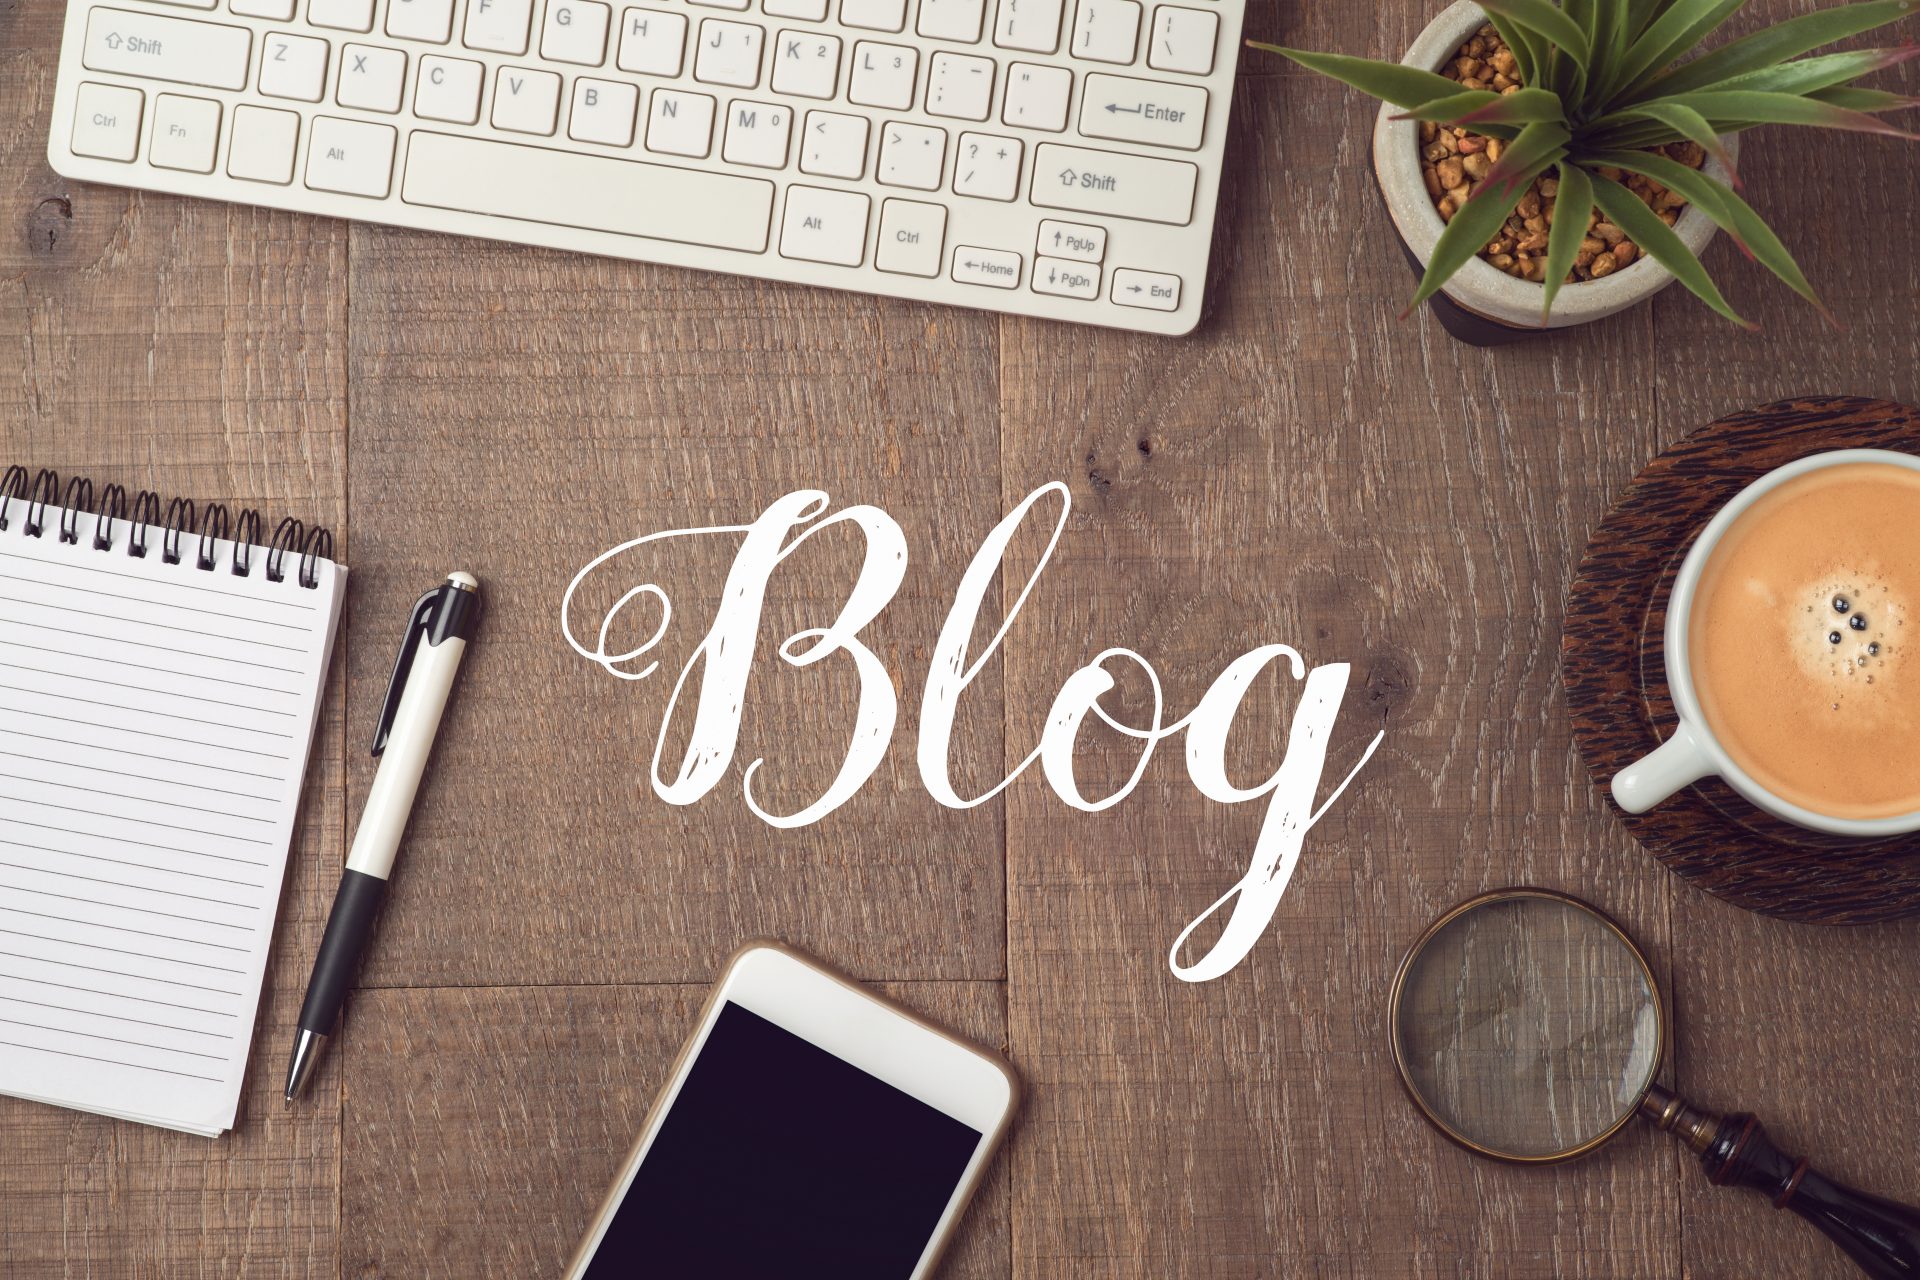 Top 10 Best Different Types of Bloggers